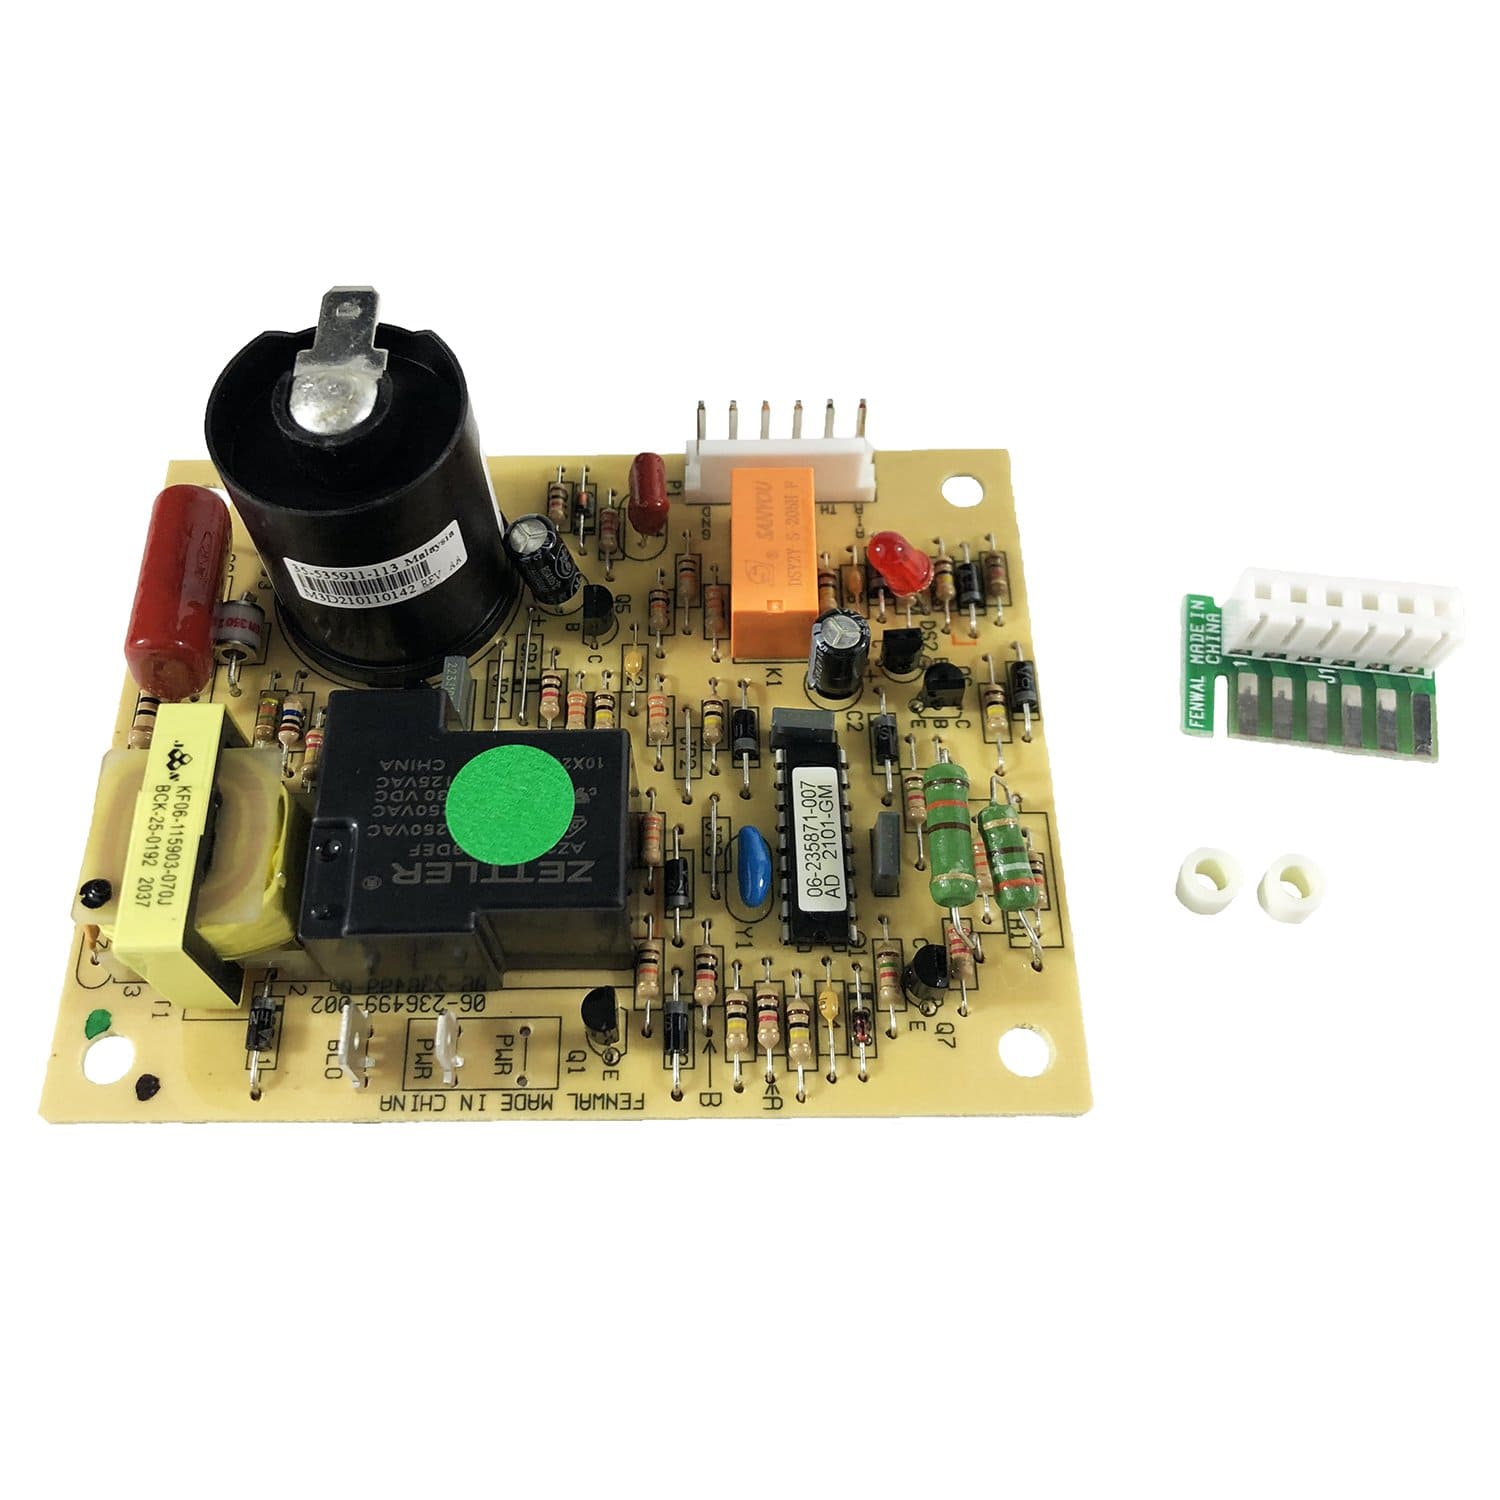 NBK Parts 11455 Ignition Board Retrofit Kit With Fan Control